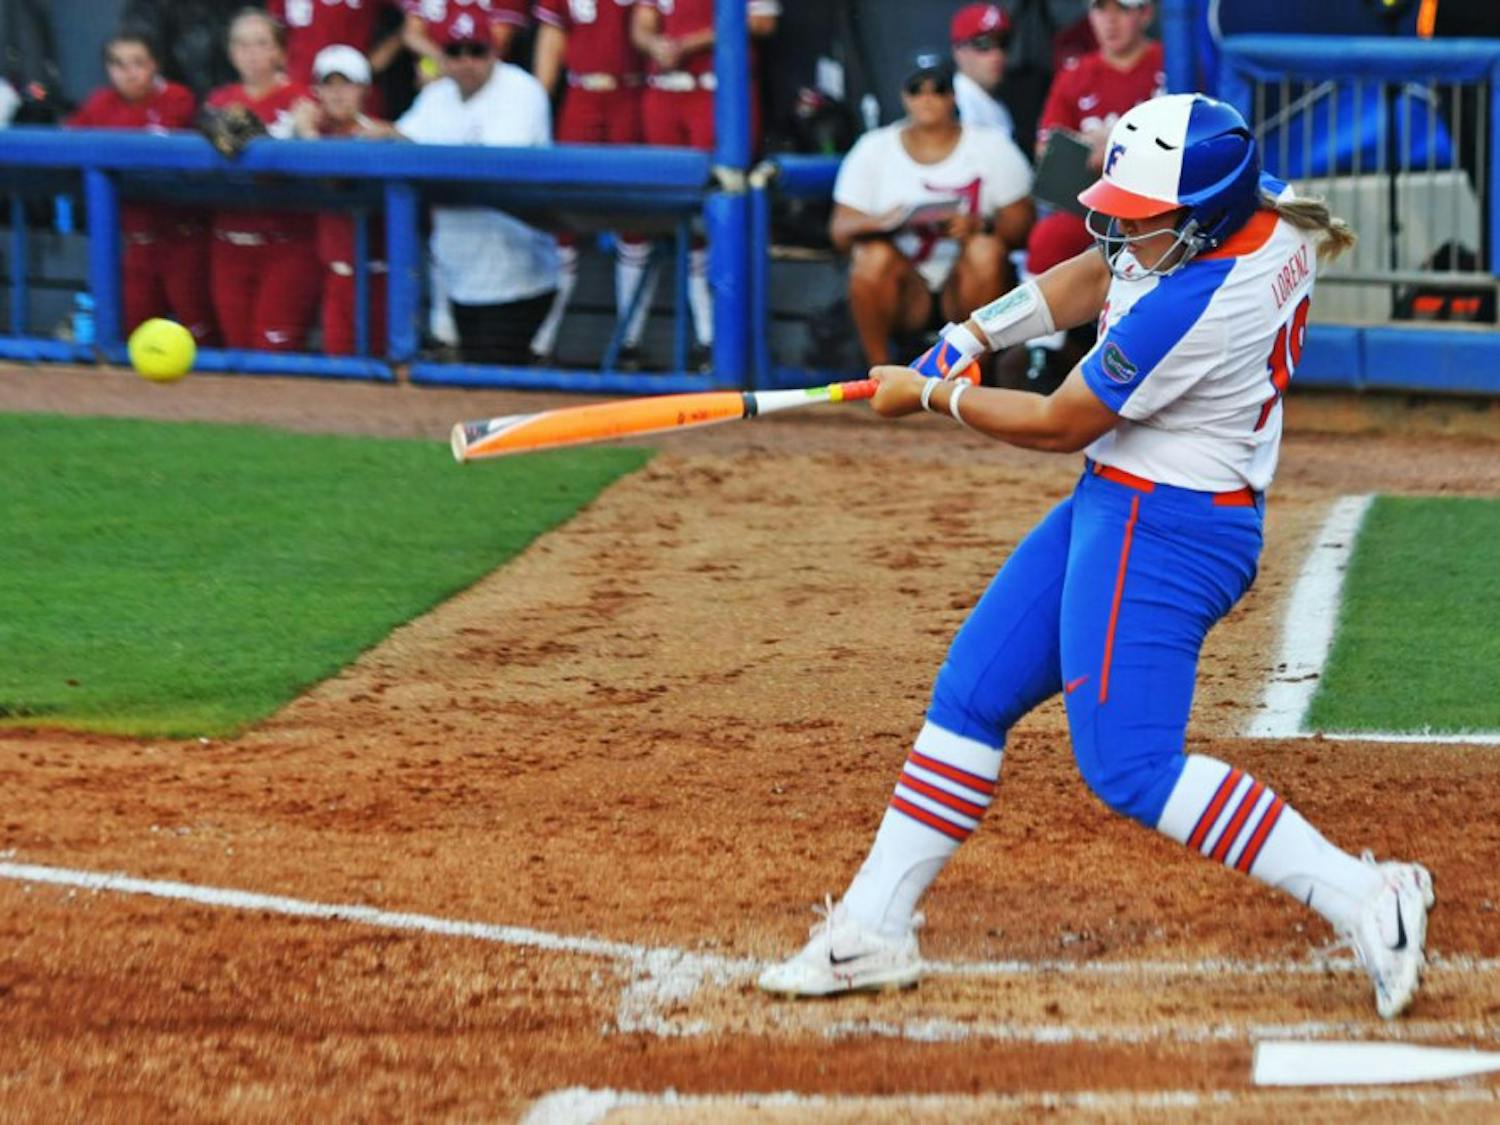 Amanda Lorenz went 4-for-4 on Friday night in the Gators 8-3 win over Mississippi State.